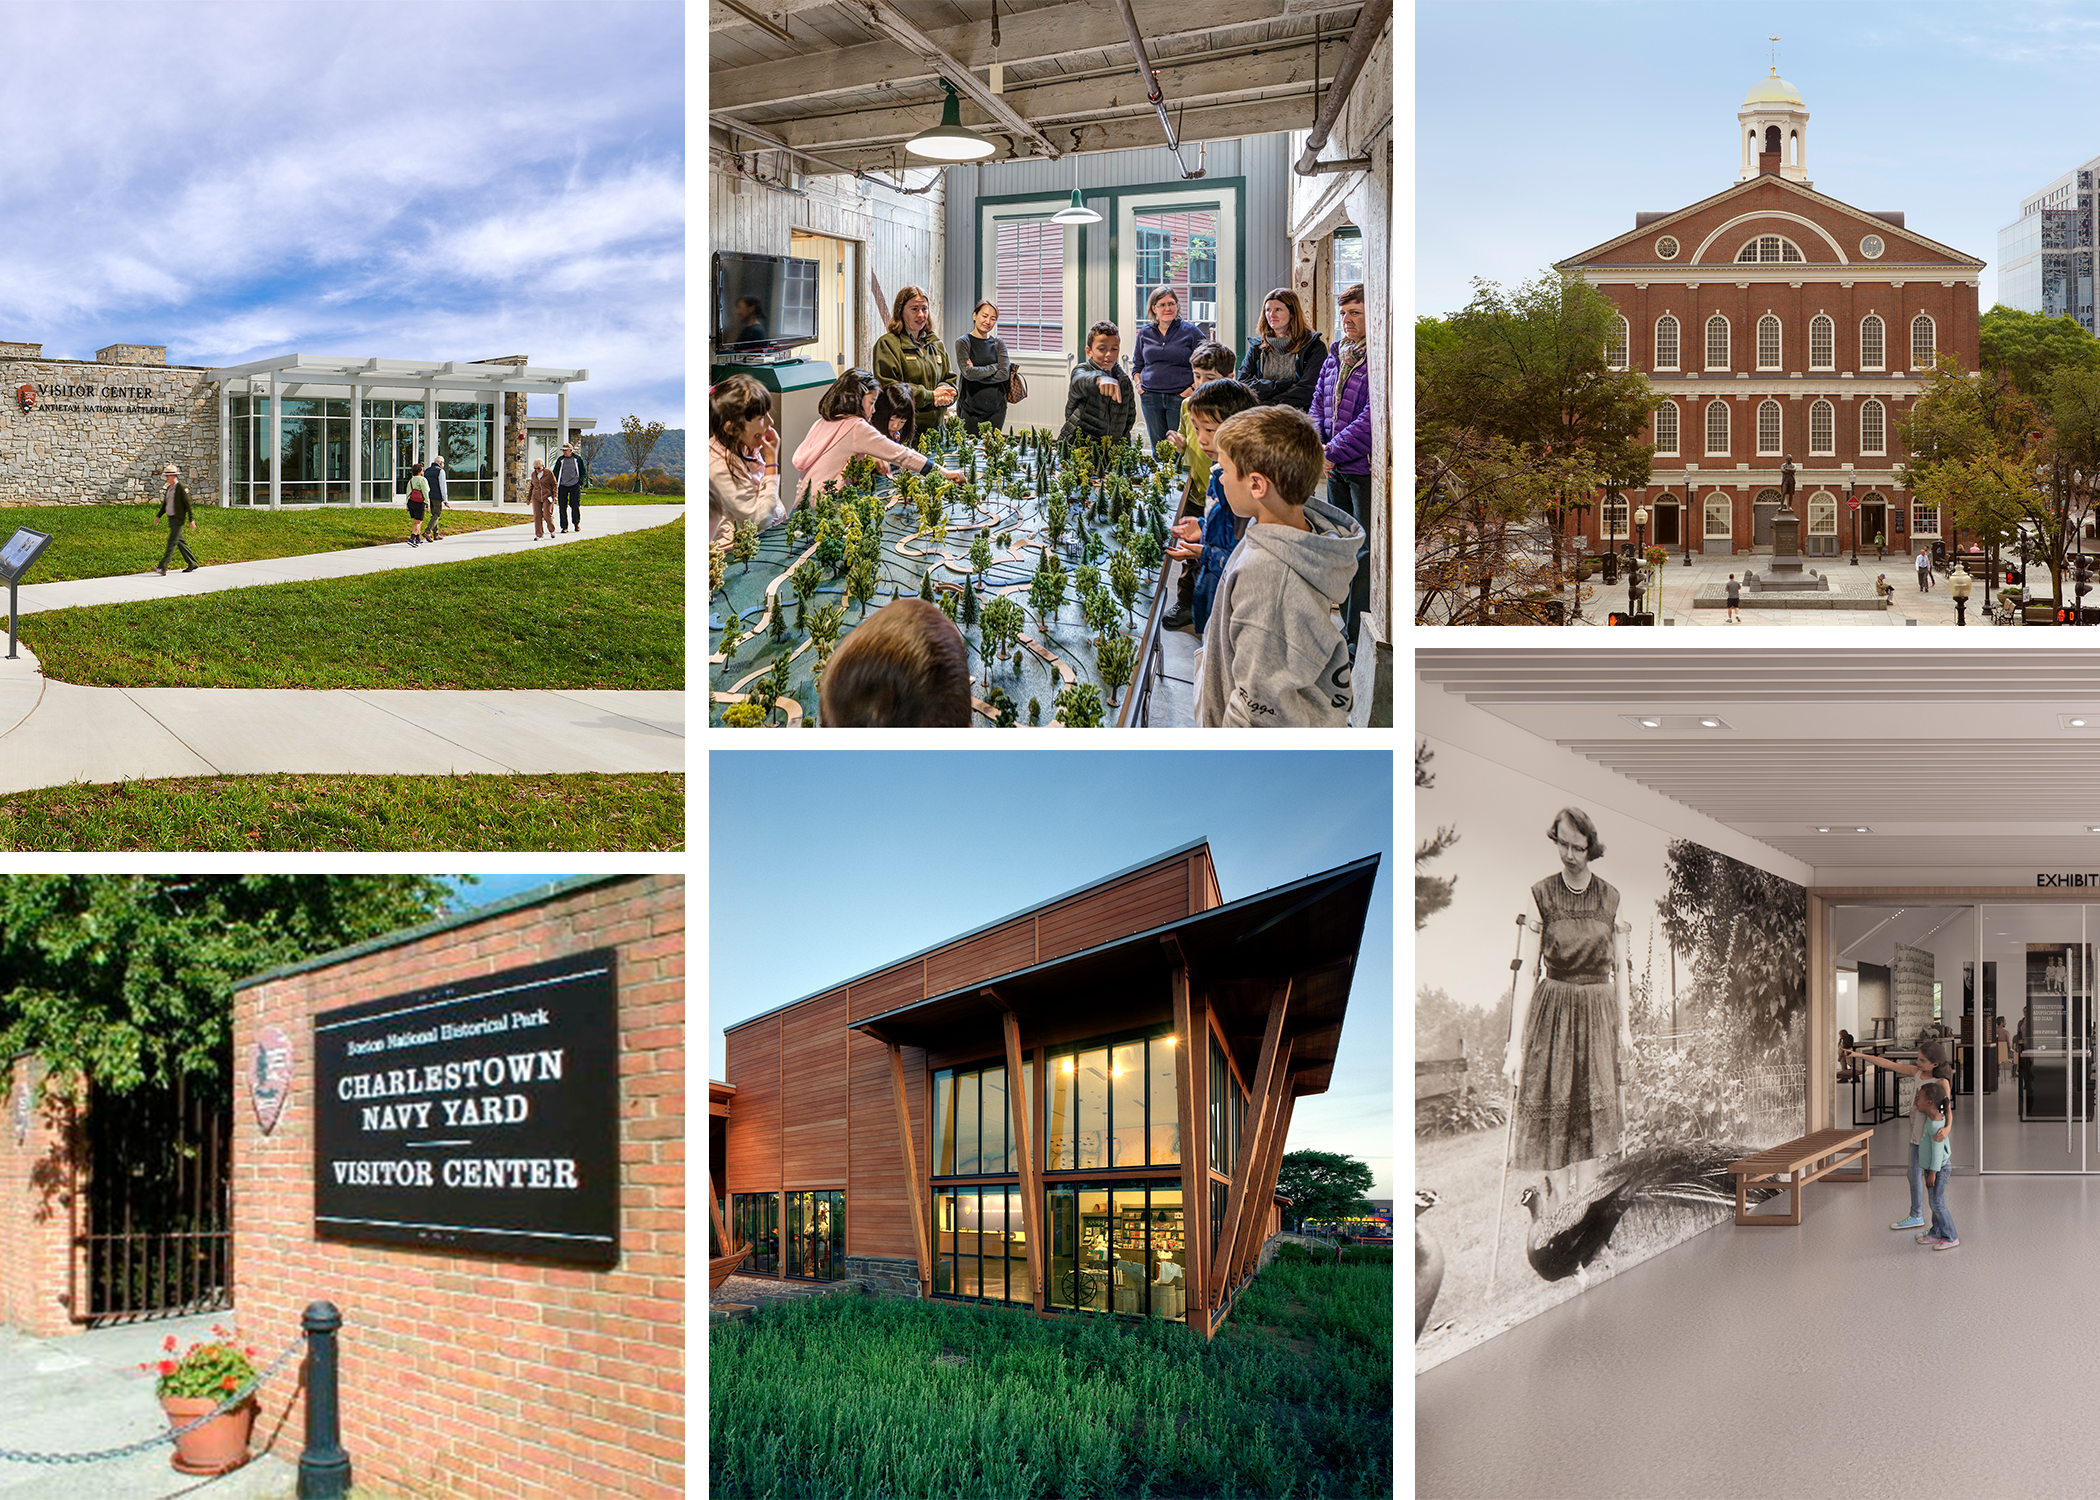 6 images of visitor centers